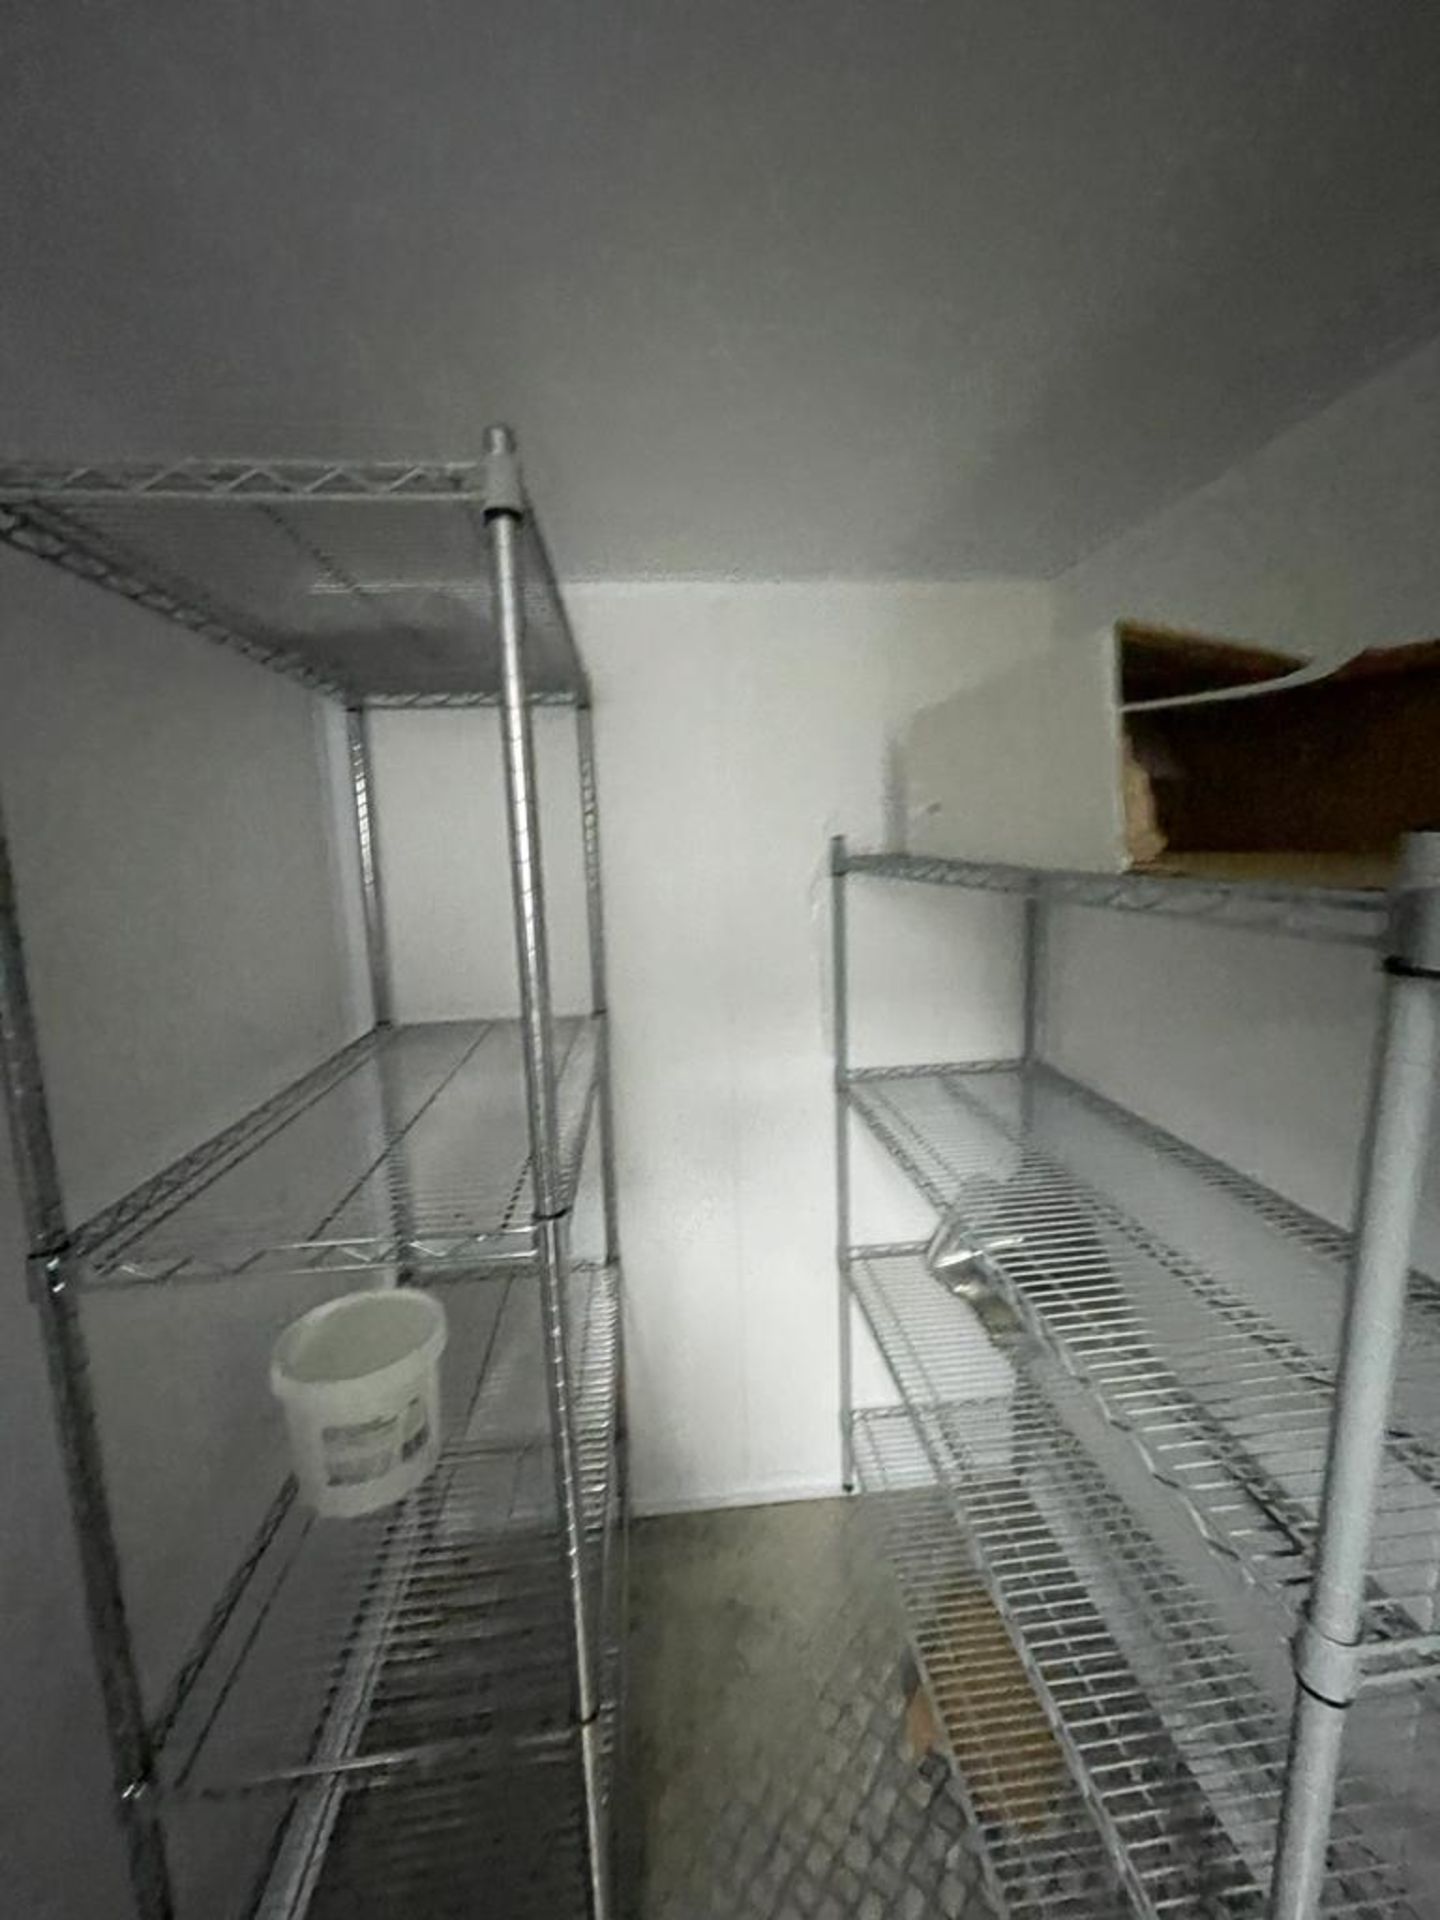 3 x Cold Room Coated Wire Shelving Units -Ref: BK252 - CL686 - - Image 4 of 5